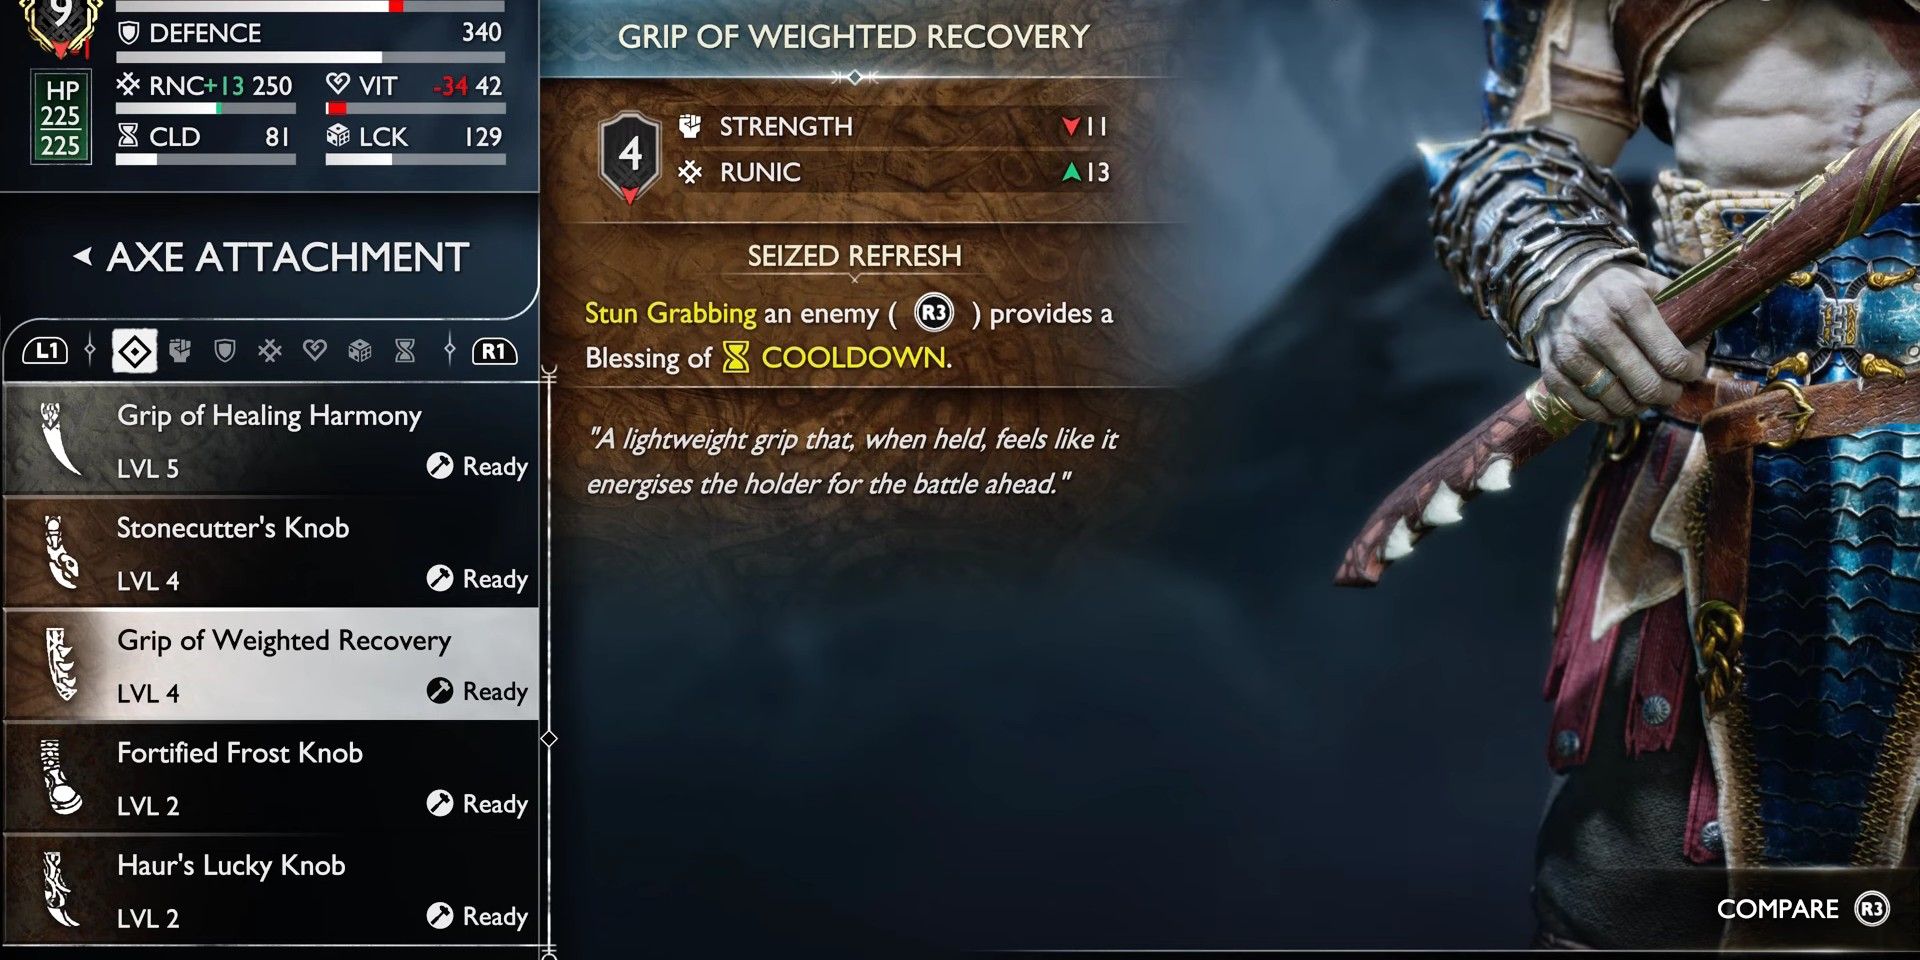 God of War Ragnarok Grip of Weighted Recovery attachment description